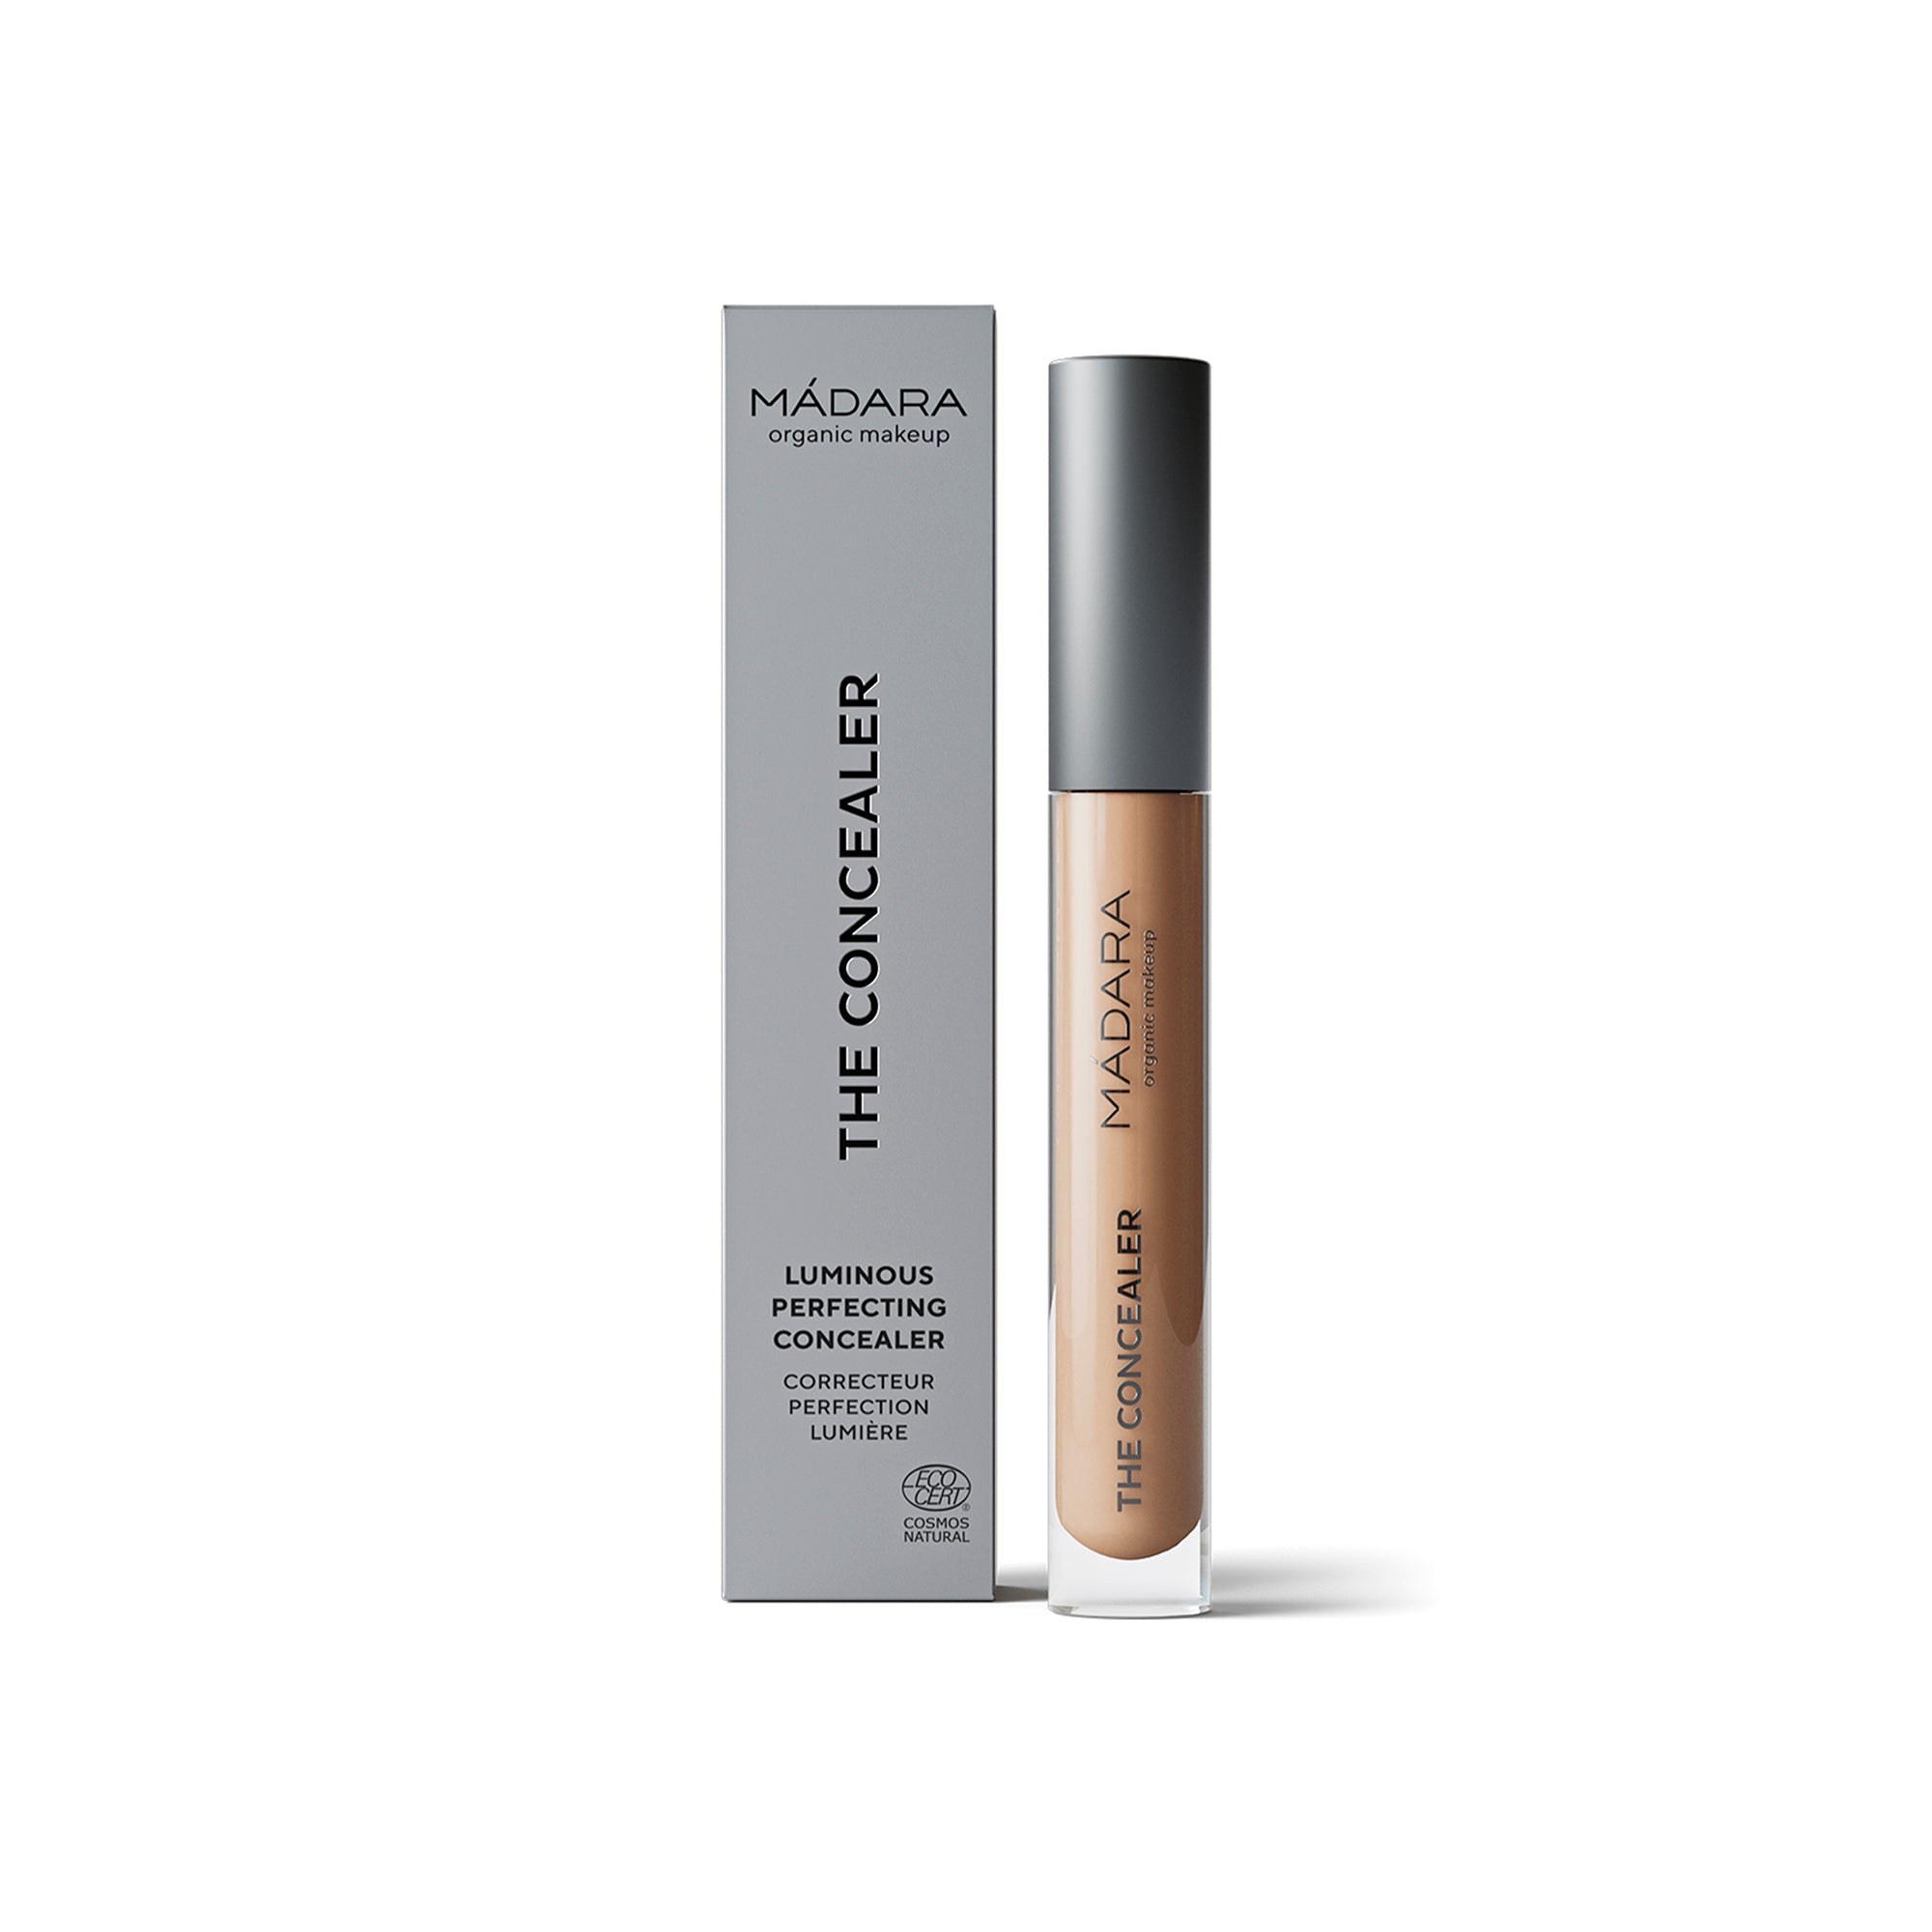 The Concealer 45 Almond